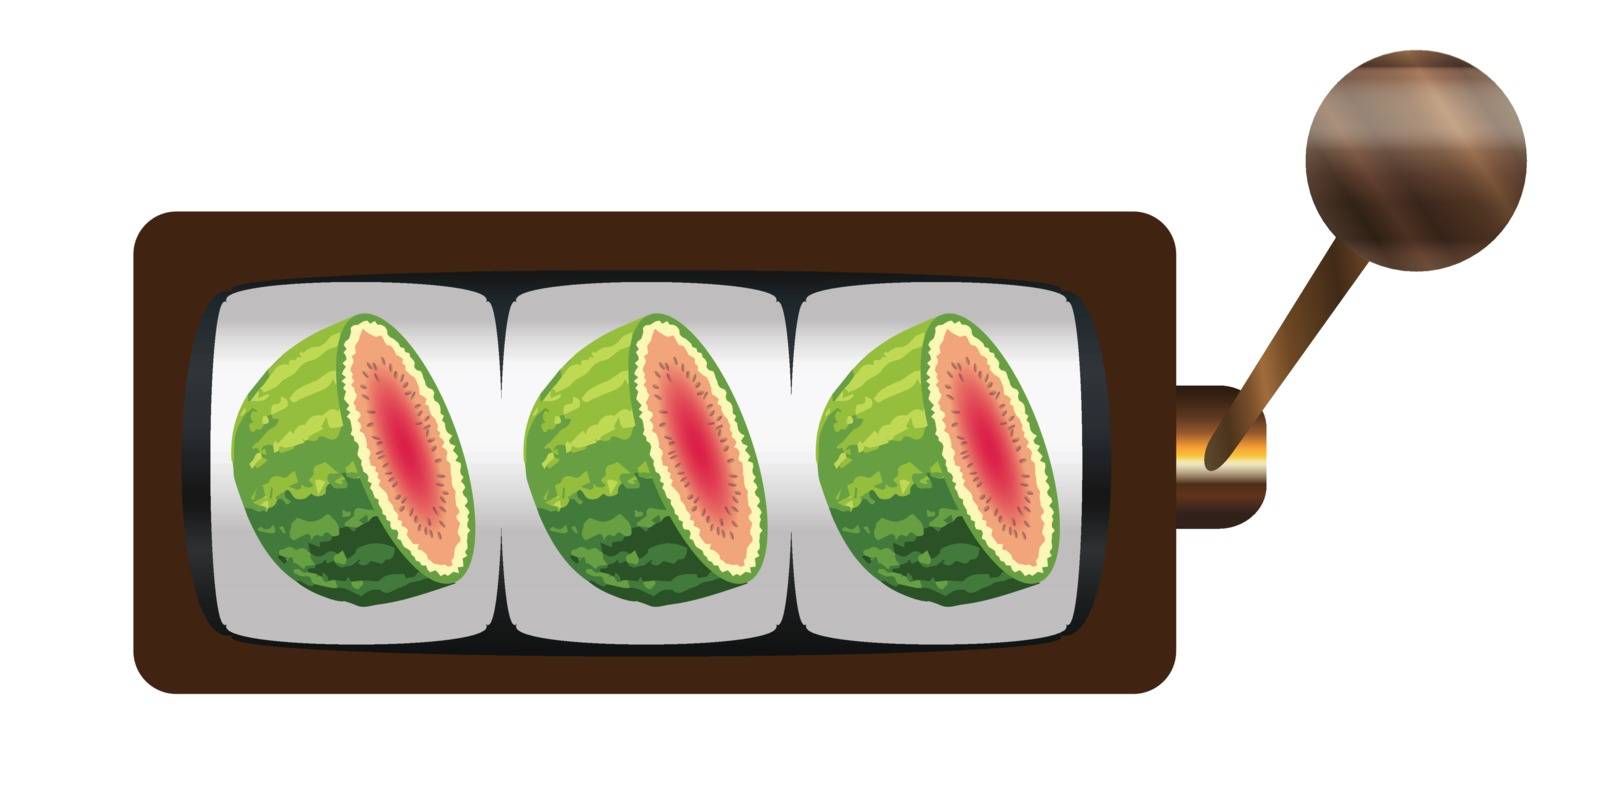 A typical cartoon style three cantaloupe or melon on a spin of a one armed bandit or fruit machine over a white background